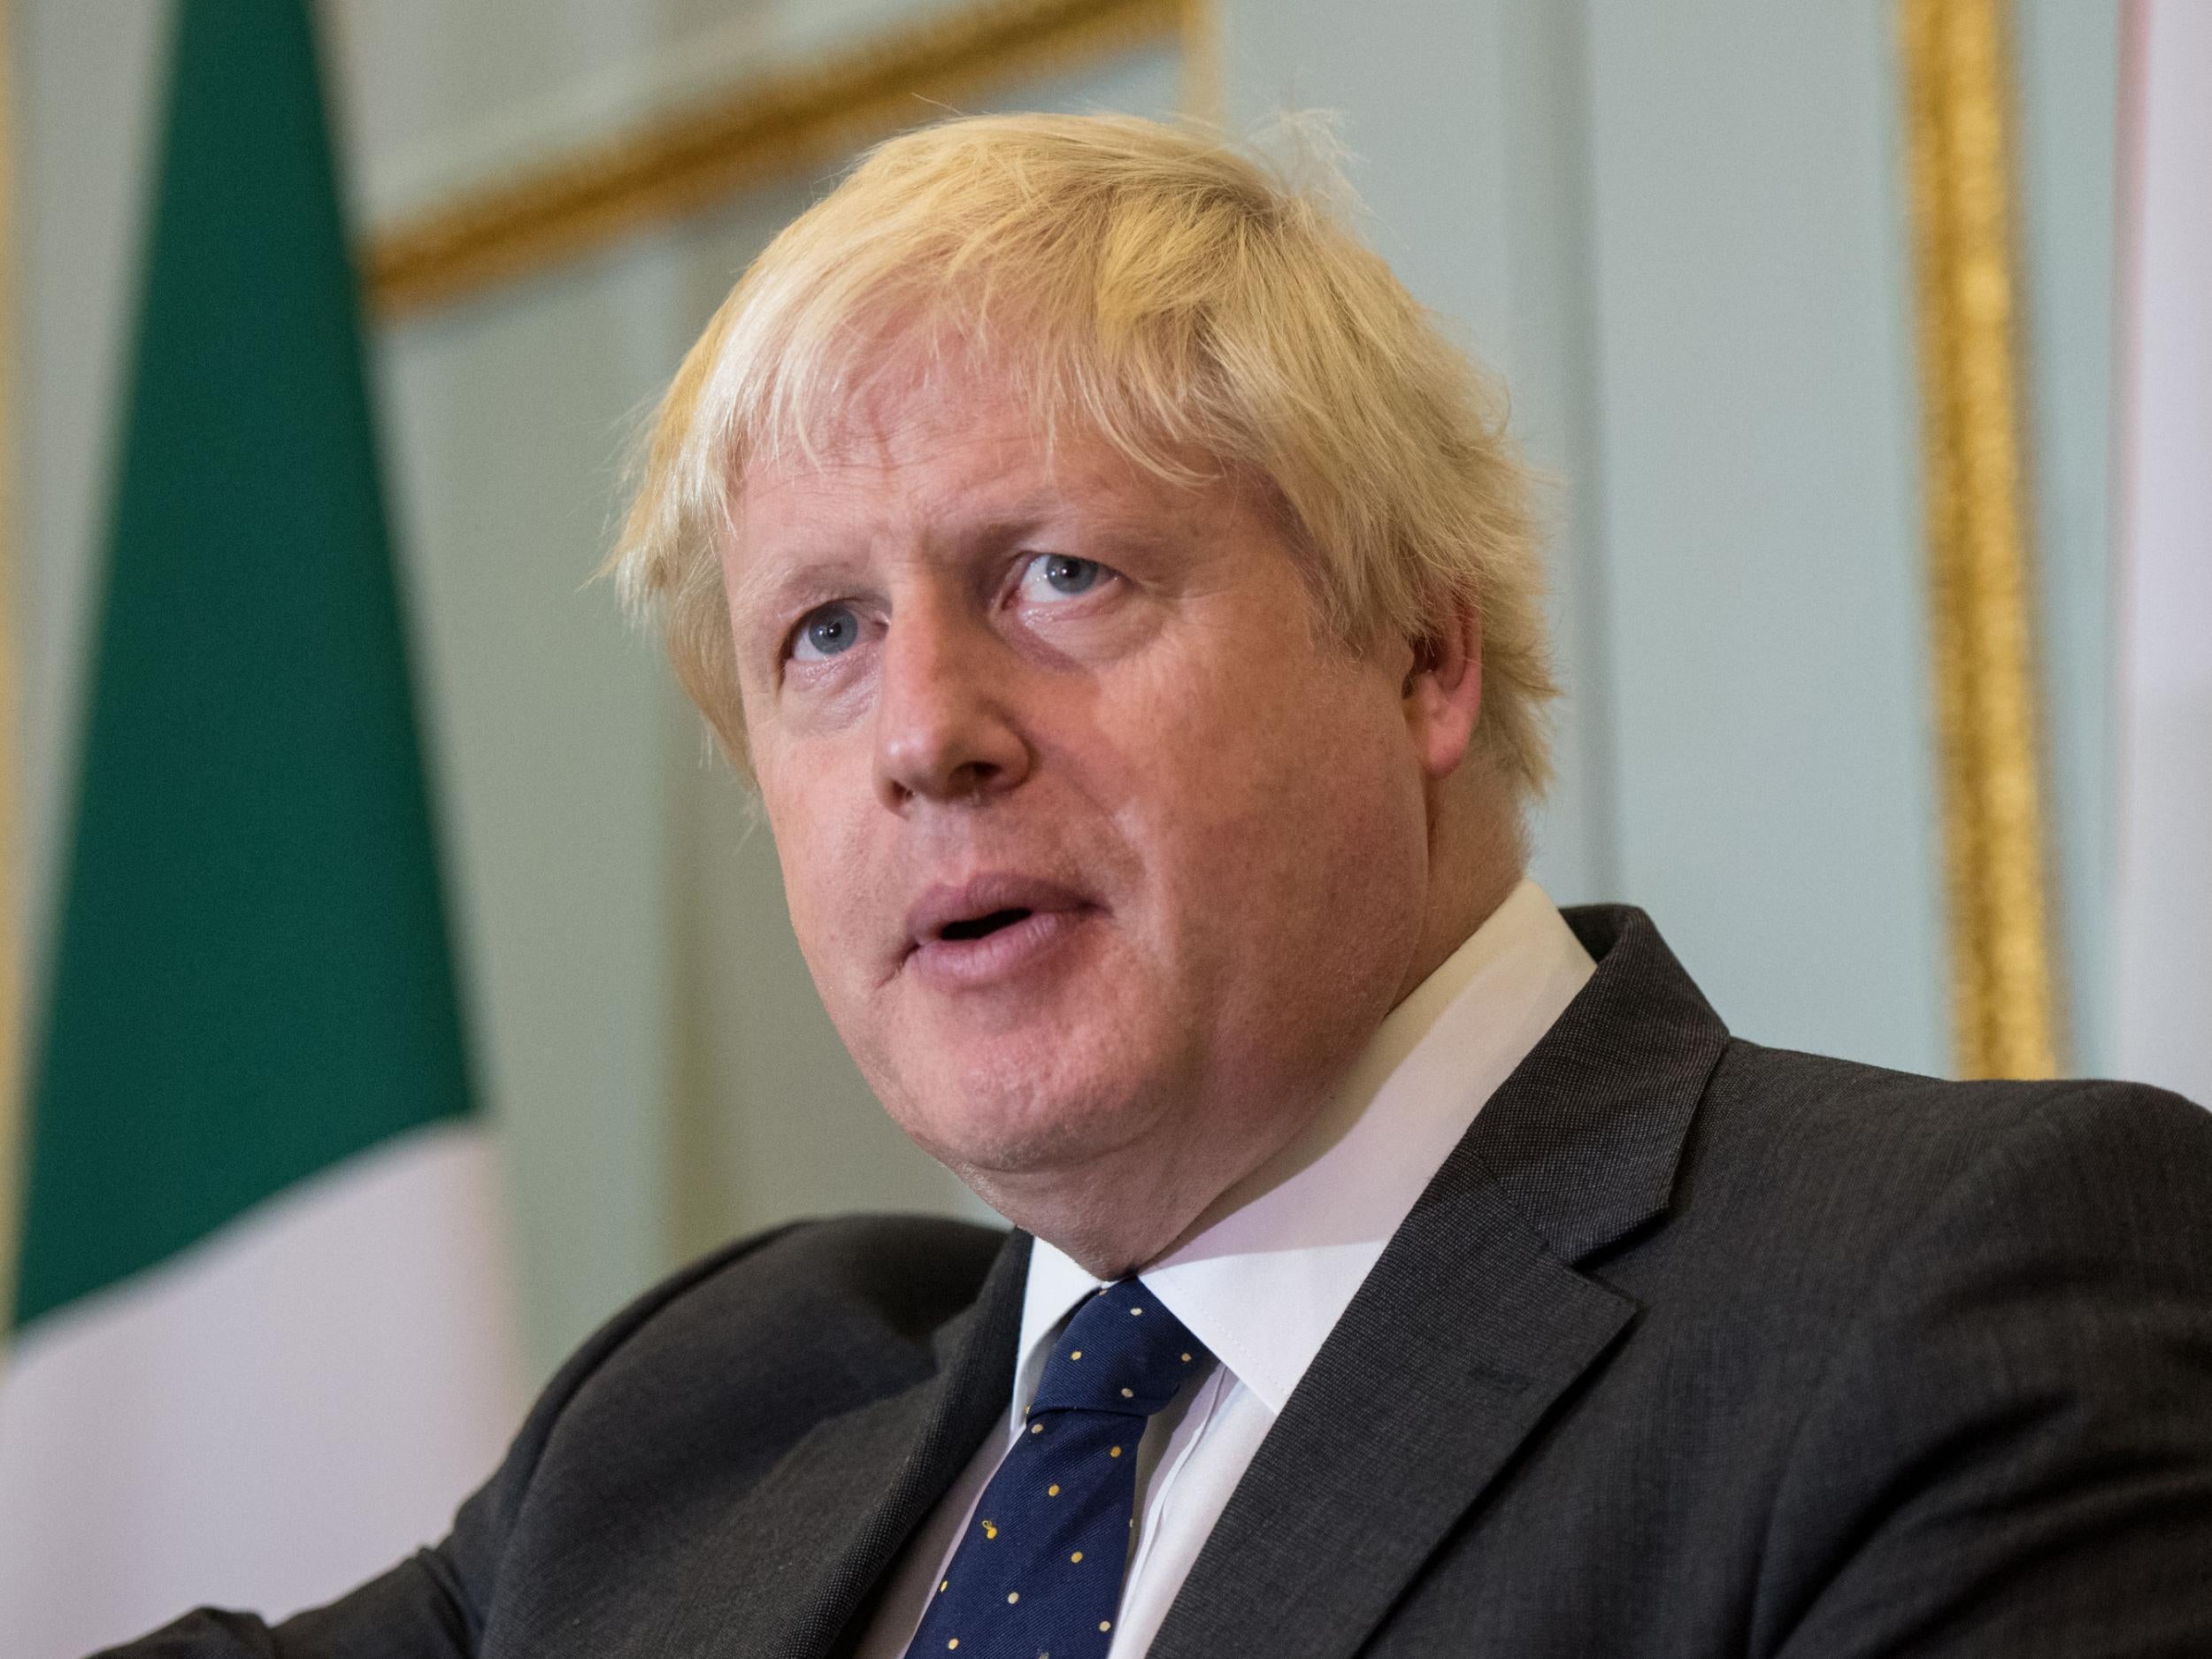 Boris Johnson himself argued that the Iraq War had fuelled extremism in a 2005 article 